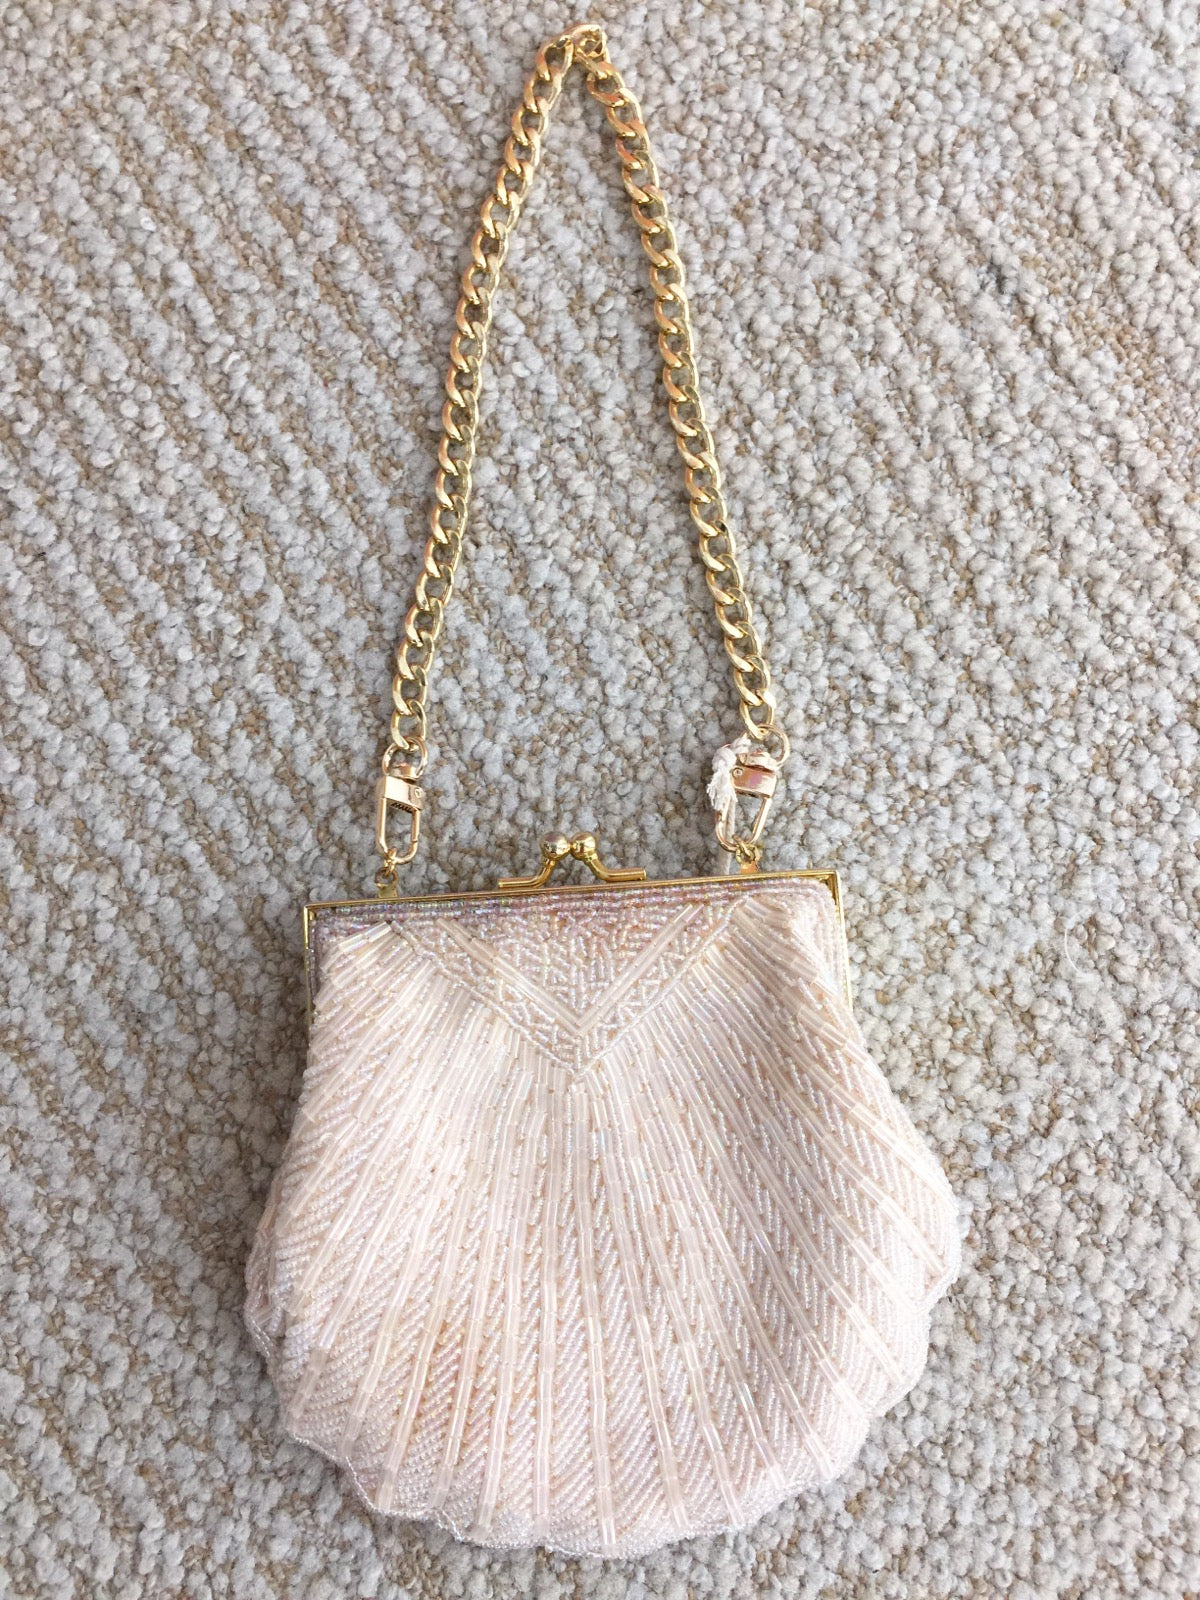 LS Upcycled Vintage Lord & Taylor Bag